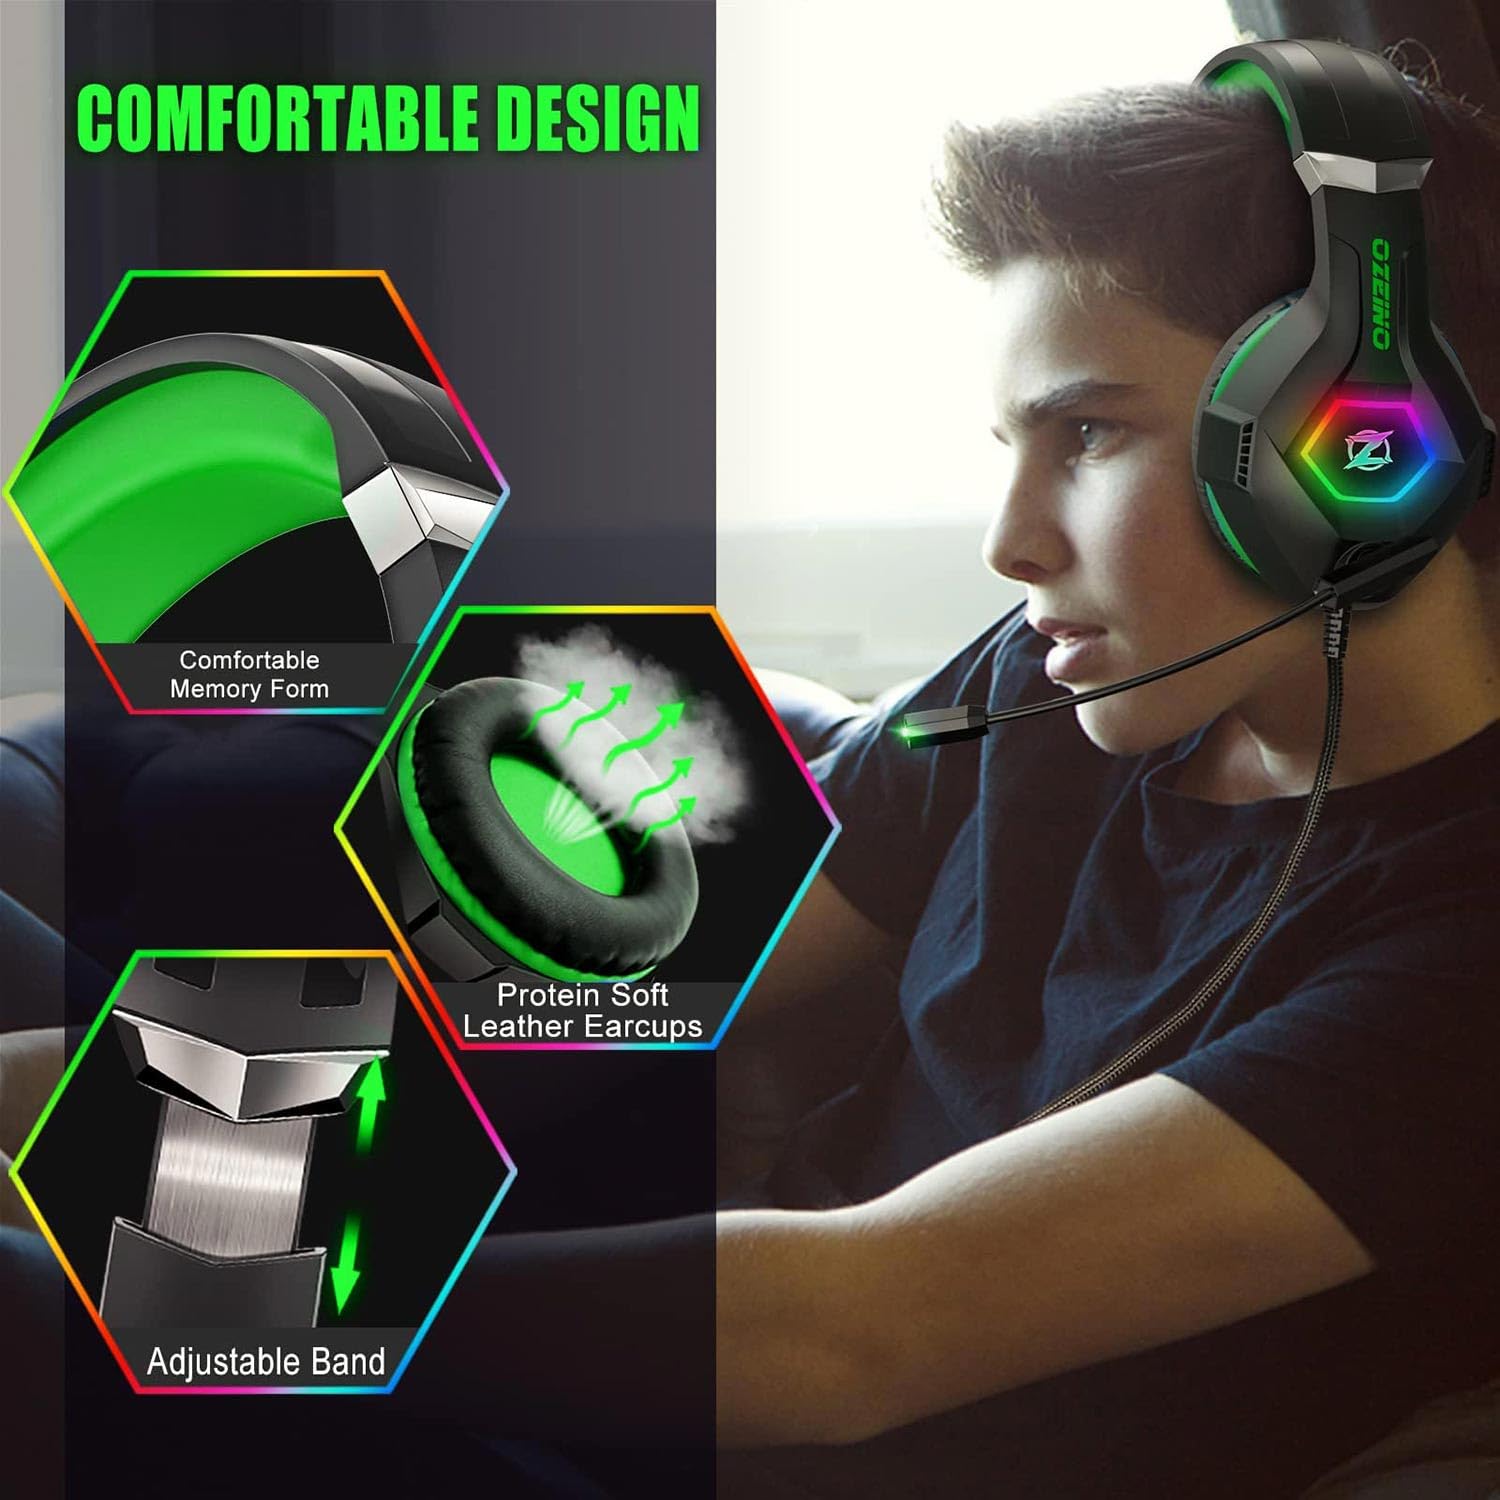 Ozeino Gaming Headset for PC, PS4, PS5, Xbox Headset, Gaming Headphones with Noise Cancelling Flexible Mic RGB Light Memory Earmuffs for Xbox one, Switch, Mac -Green